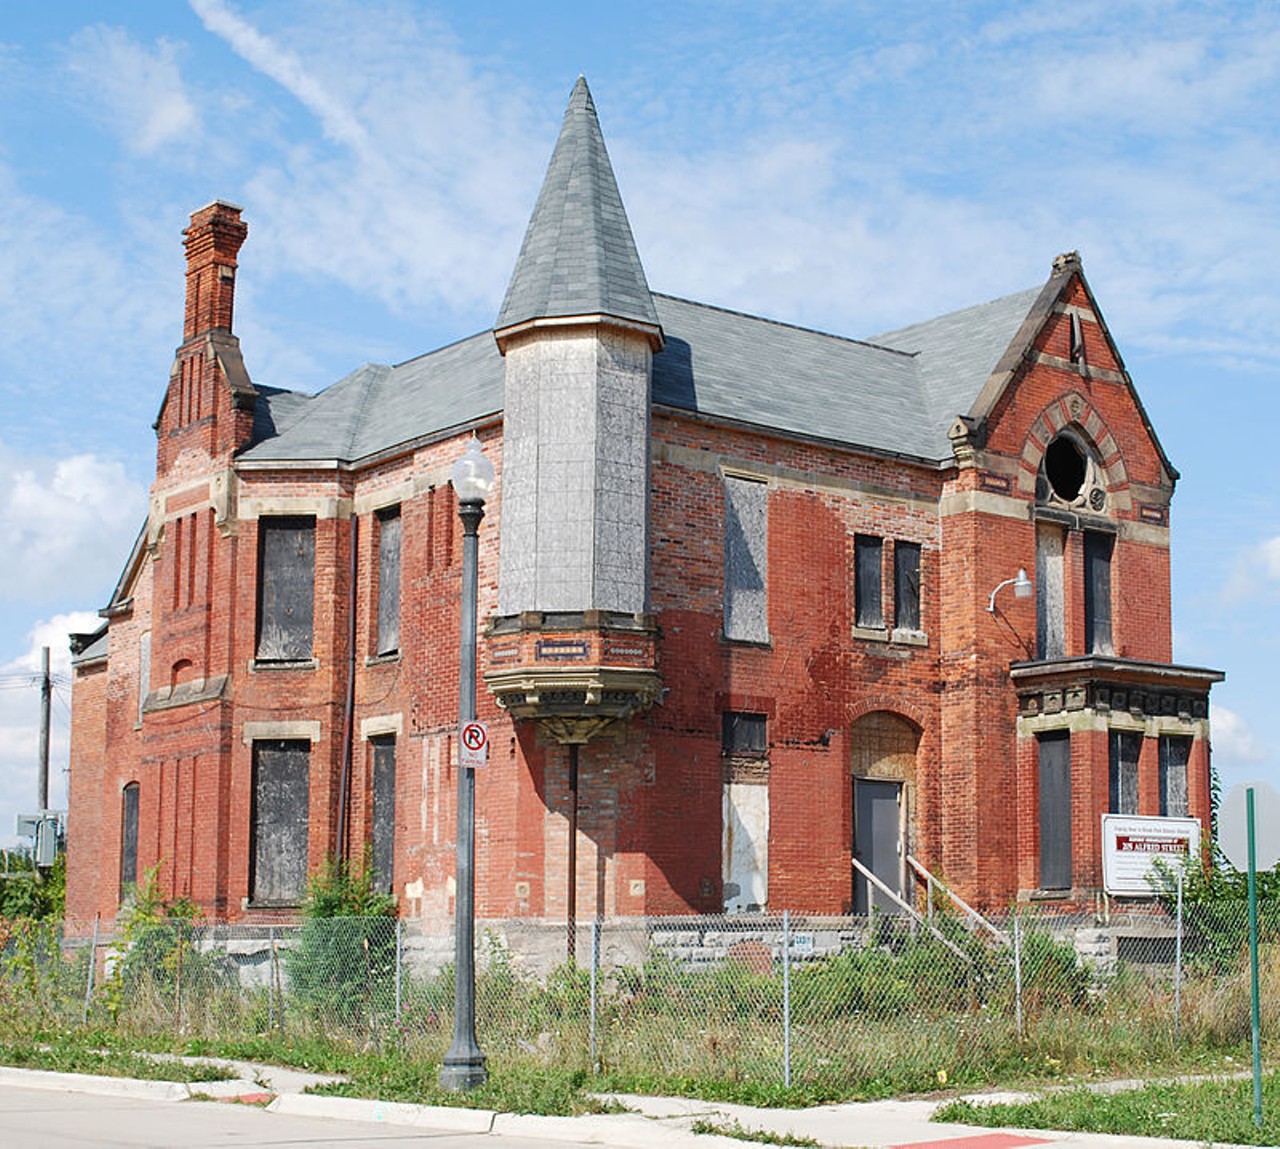 Abandoned House
The Ransom Gillis House, in its pre-Rehab Addict state, provided the scene for one of Batman&#146;s late night crime fighting adventures. Moviegoers following the app may be surprised to see how different this site looks now. (Photo Credit: Andrew Jameson via Wikimedia Commons)